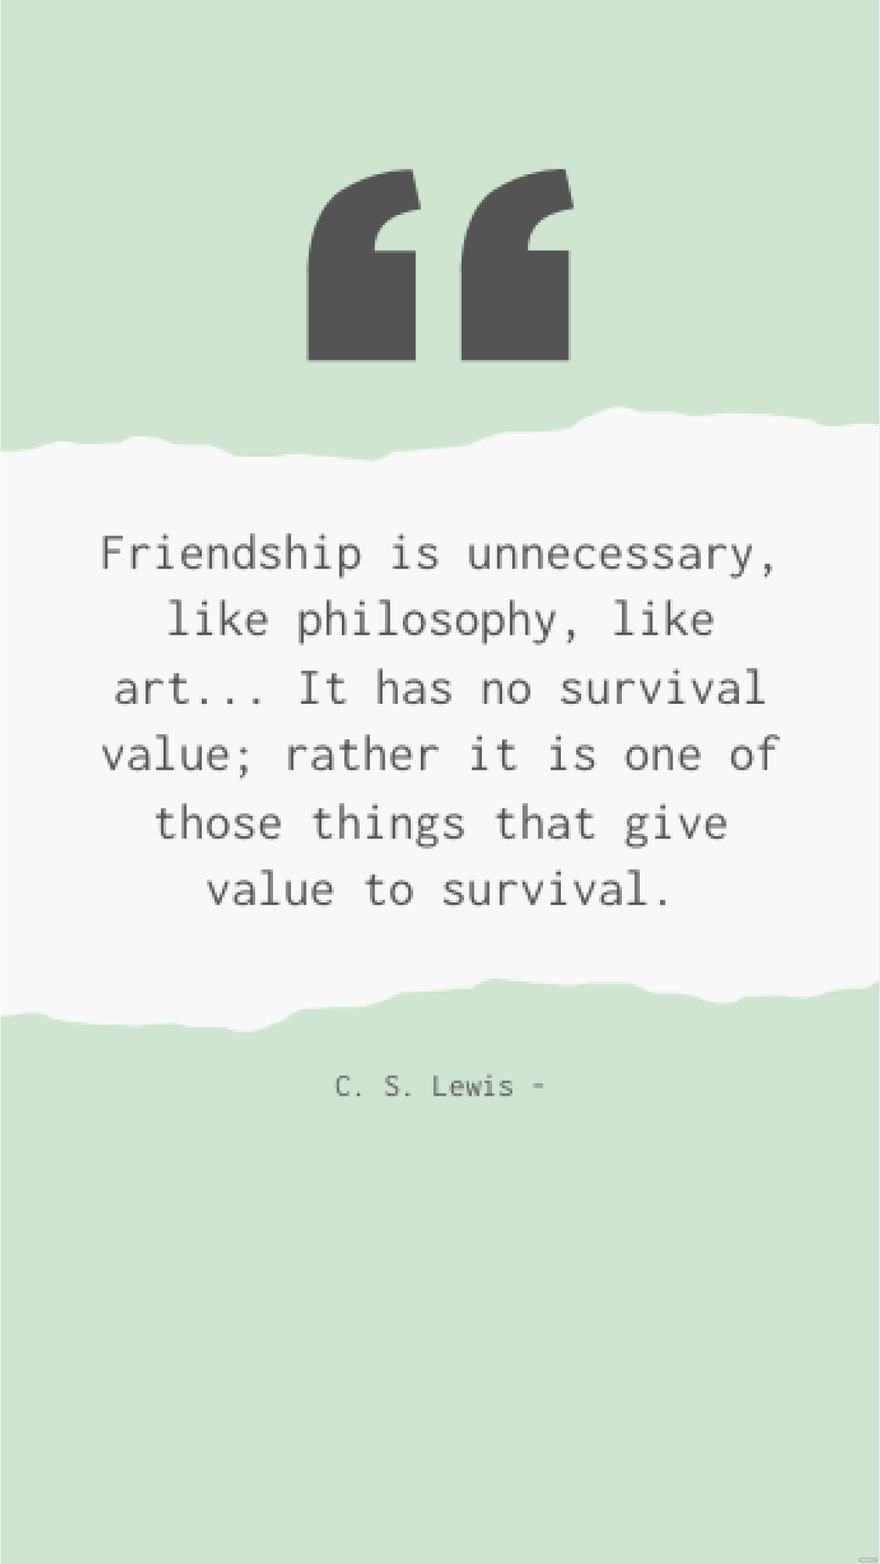 C. S. Lewis - Friendship is unnecessary, like philosophy, like art... It has no survival value; rather it is one of those things that give value to survival.